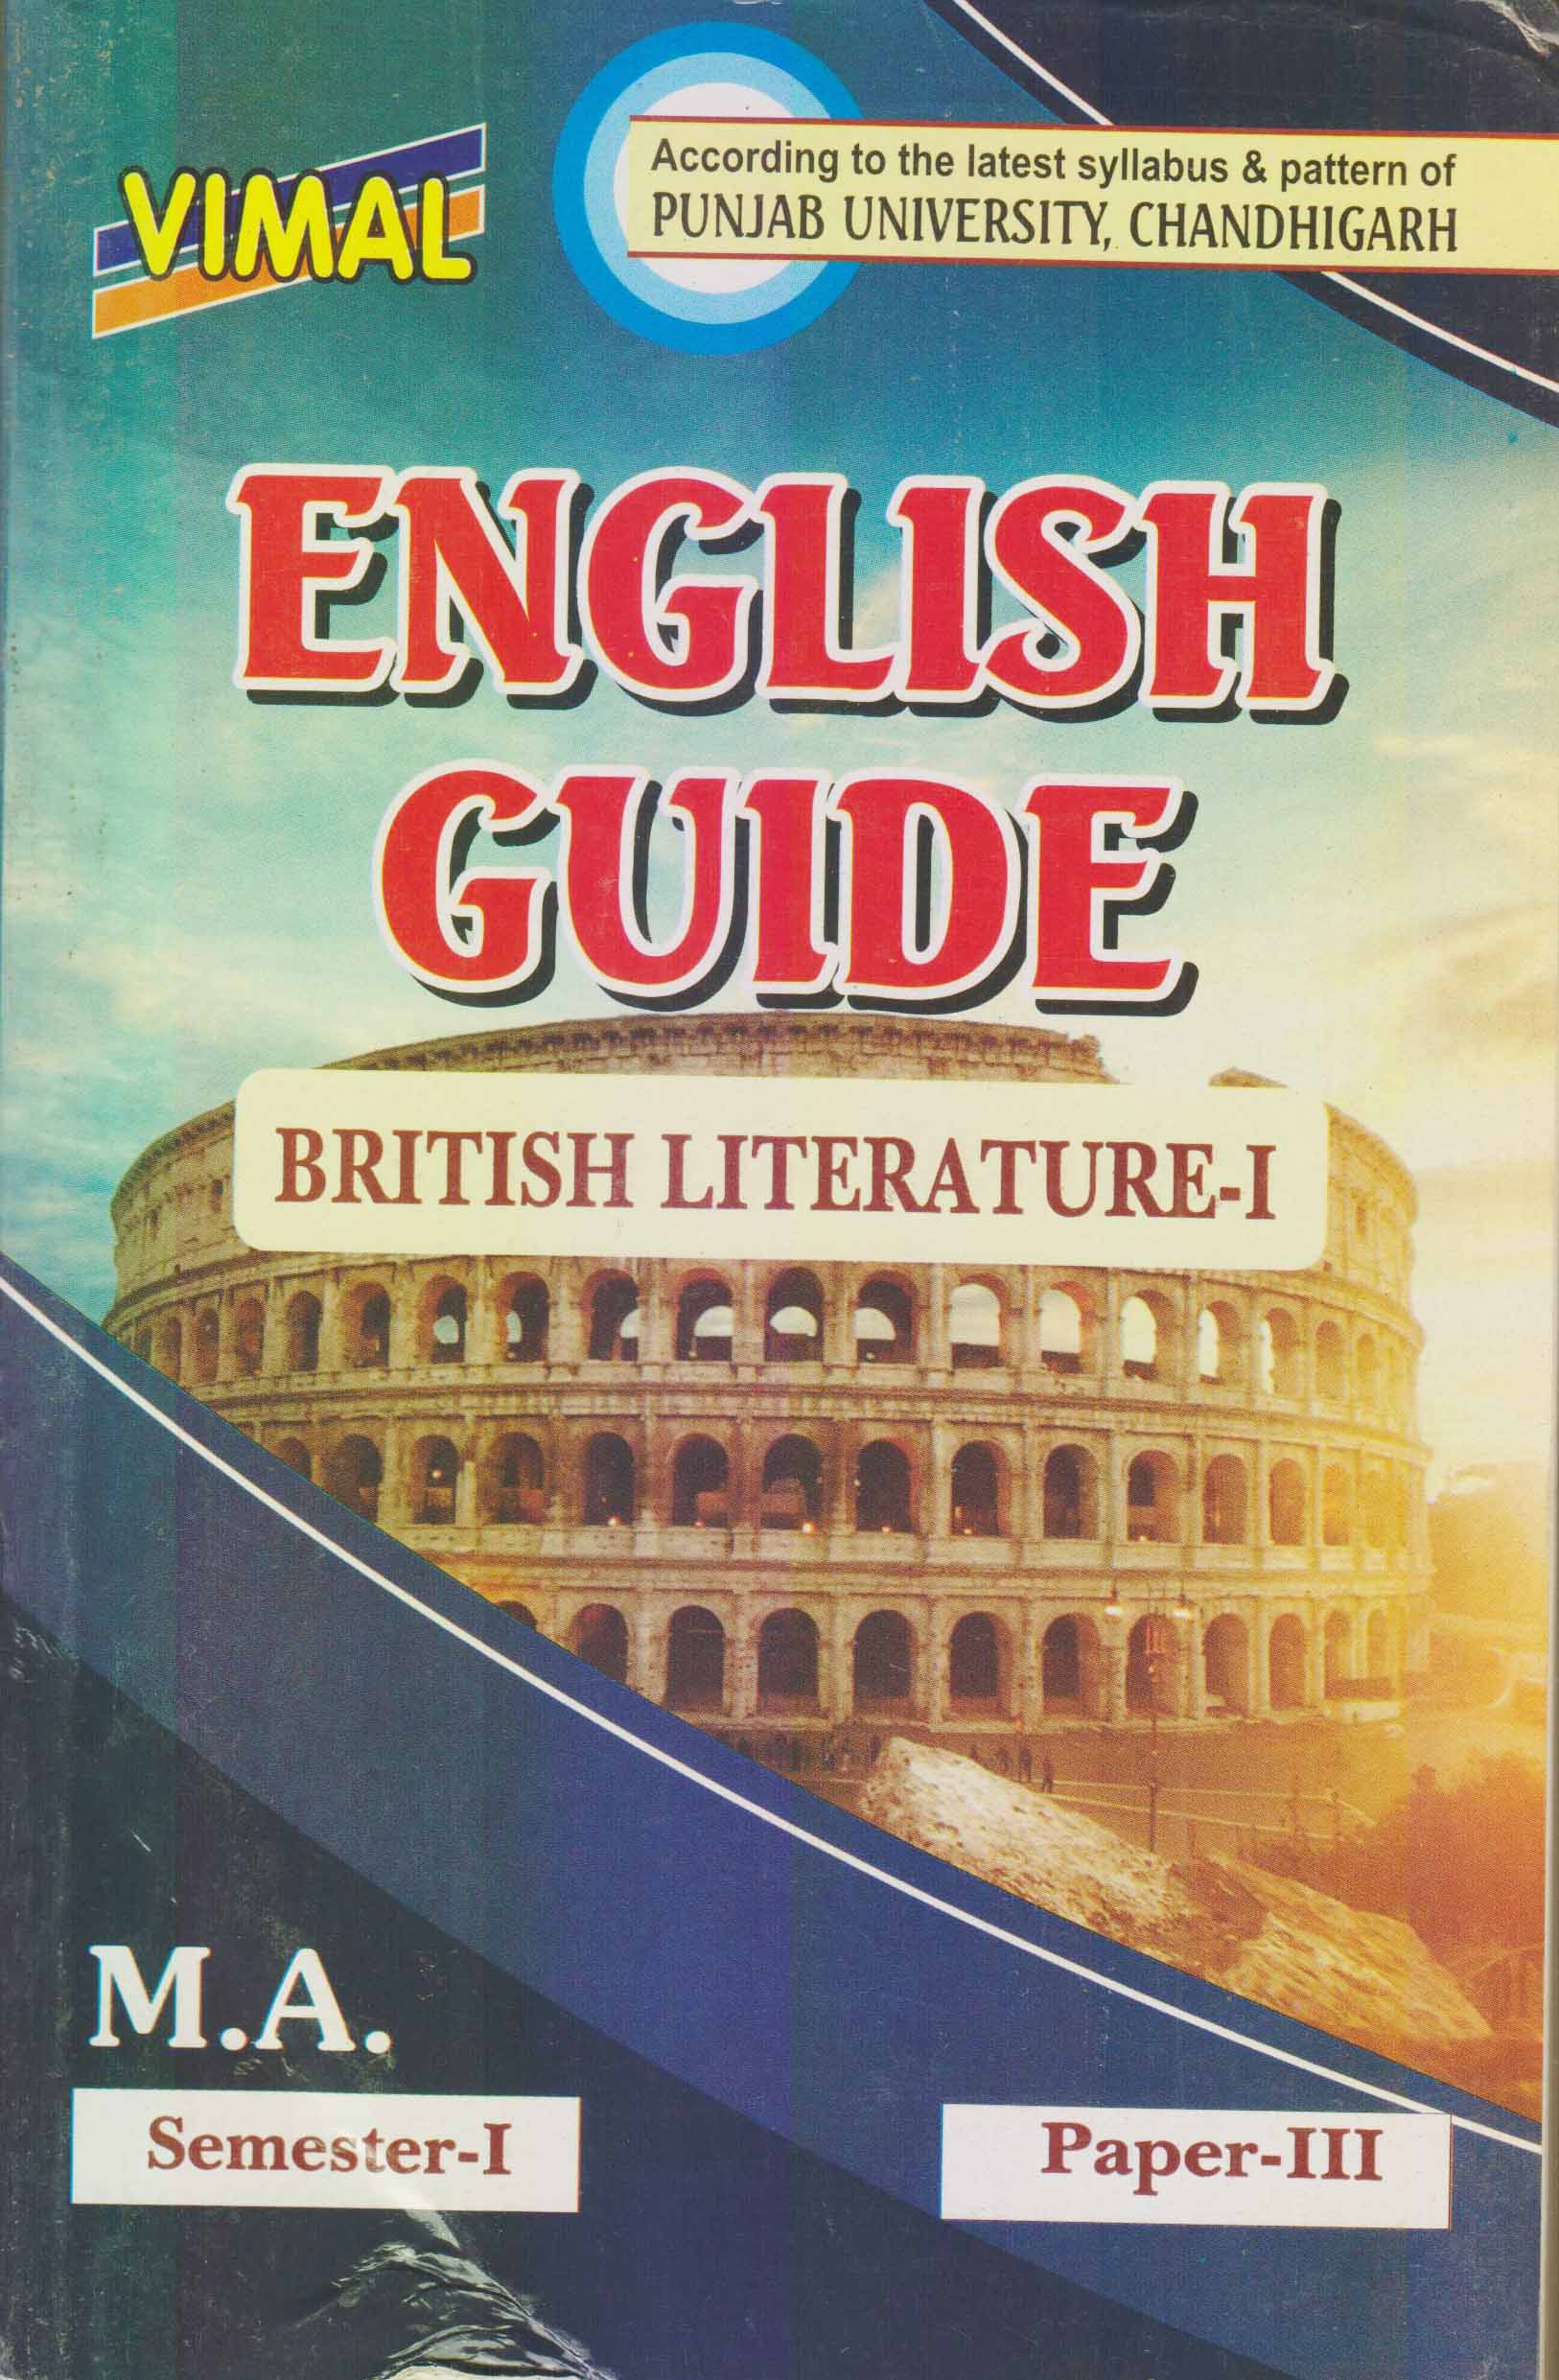 Vimal English Guide British Literature-I for M.A. Sem. 1, (Paper III) New Edition